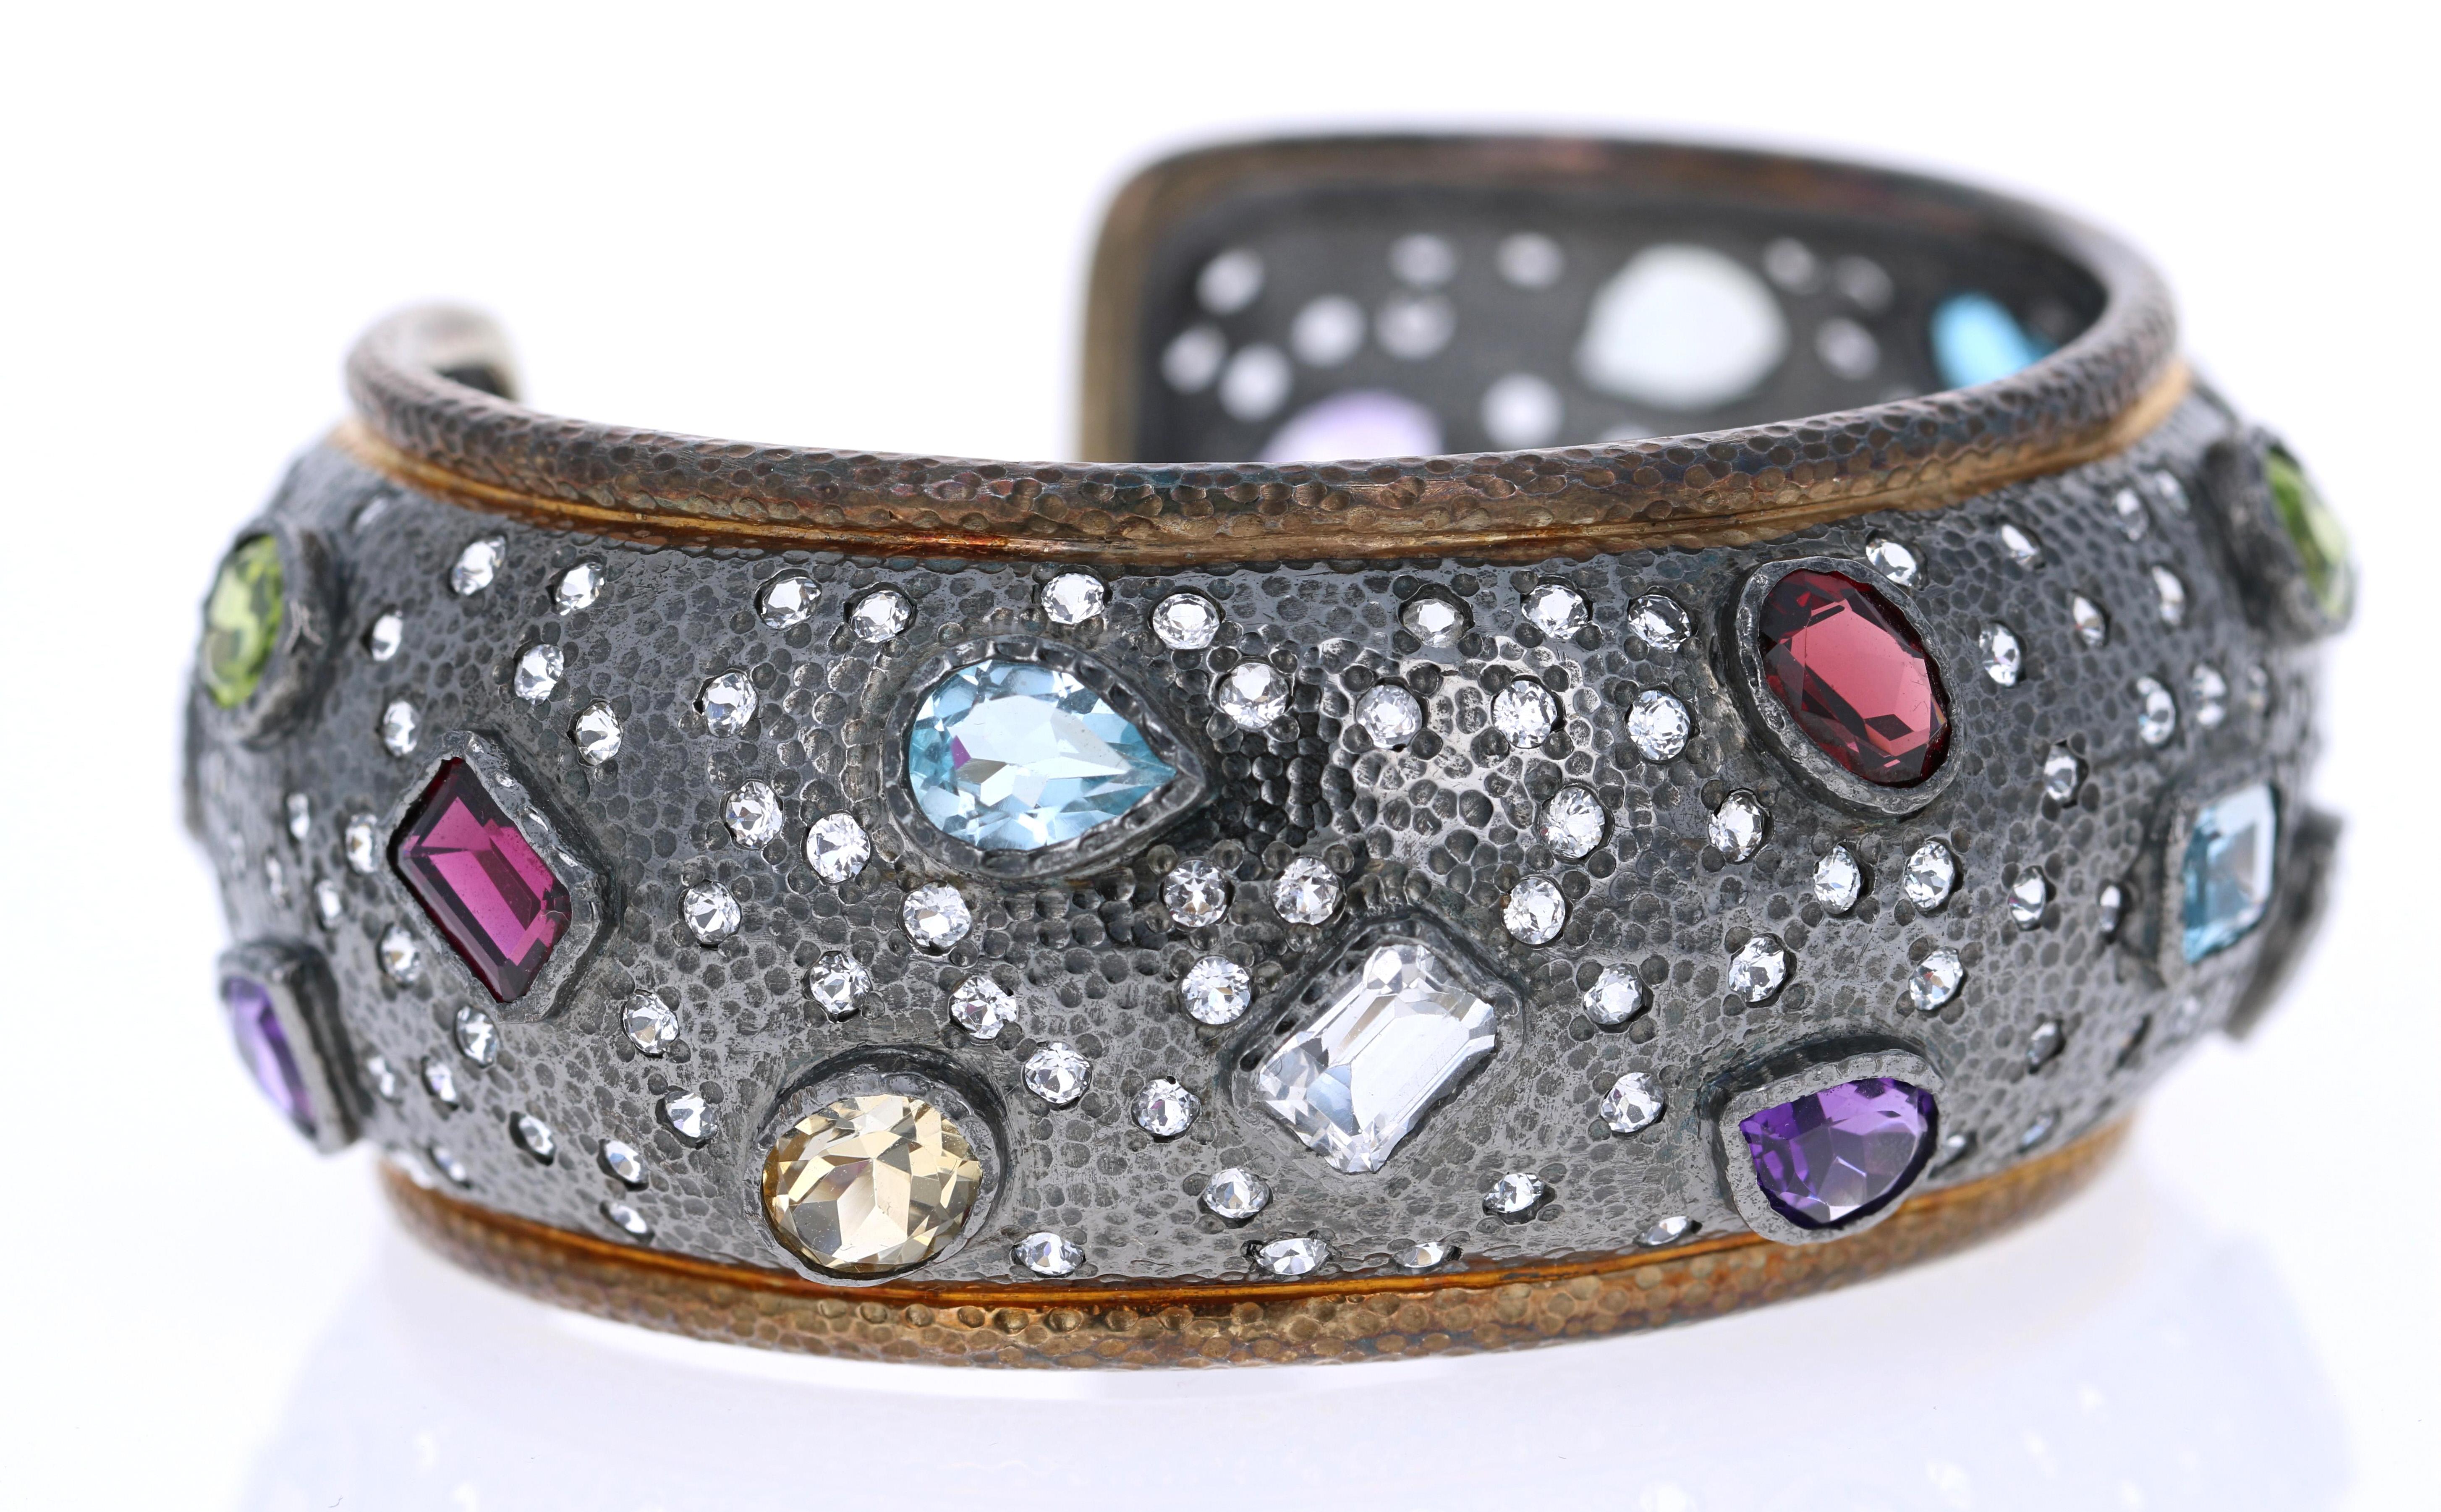 This Multi Colored Stone Cuff Bangle has Oval, Pear and Emerald Cut stones that are genuine Amethysts, Blue Topaz, Garnets, Peridot, White Topaz, and Citrines. 

The bangle is handmade in 925 silver with a hammered effect on the metal. 

Dress it up